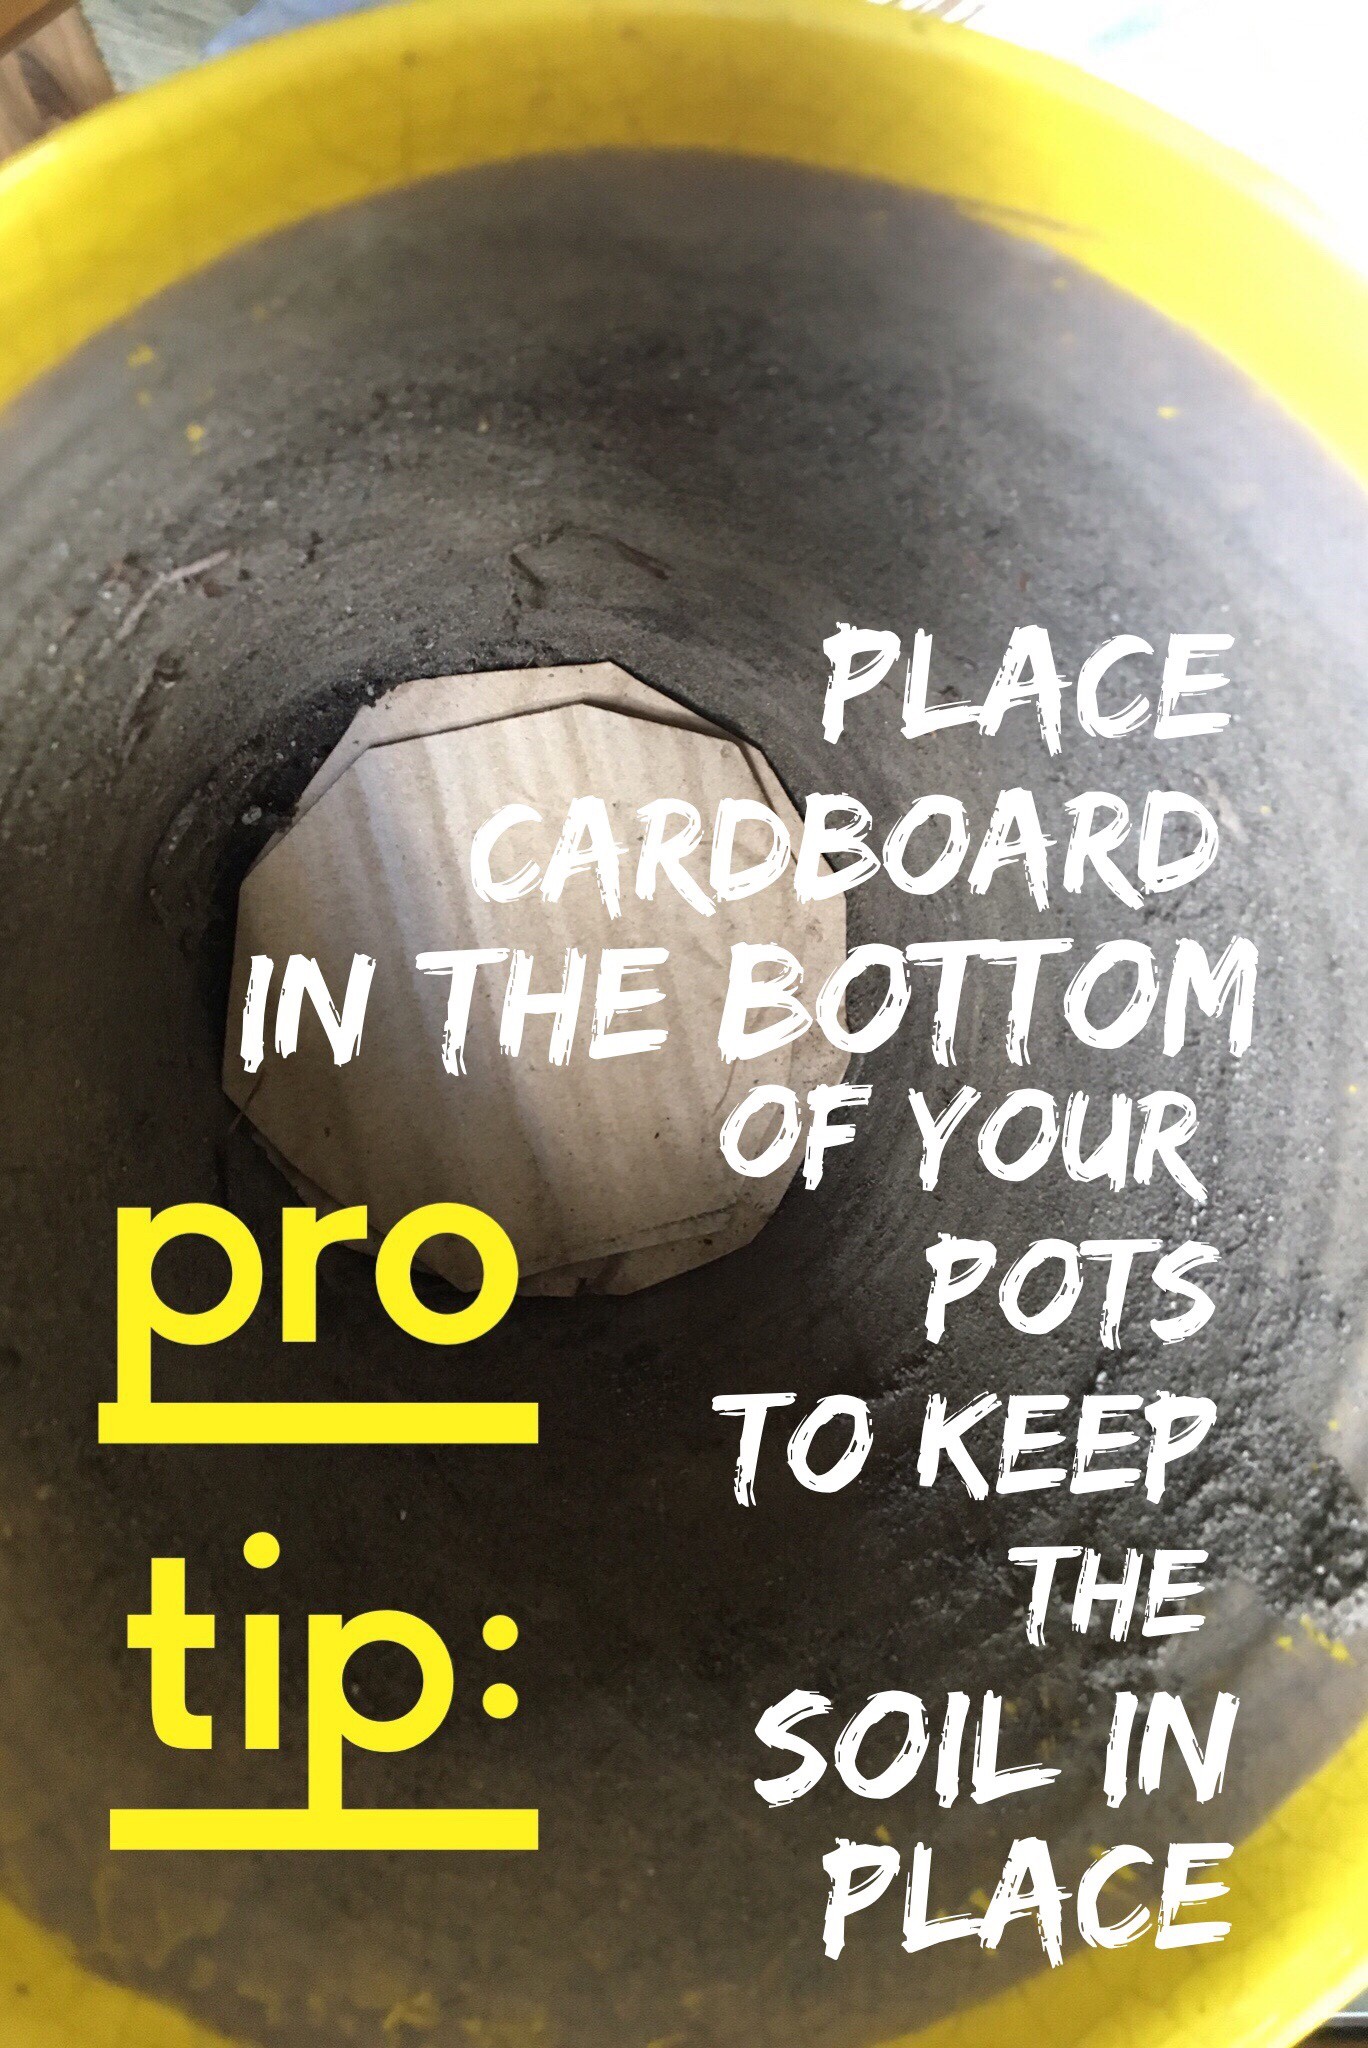 Pro Tip: Place cardboard in the bottom of your pots to keep the soil in place